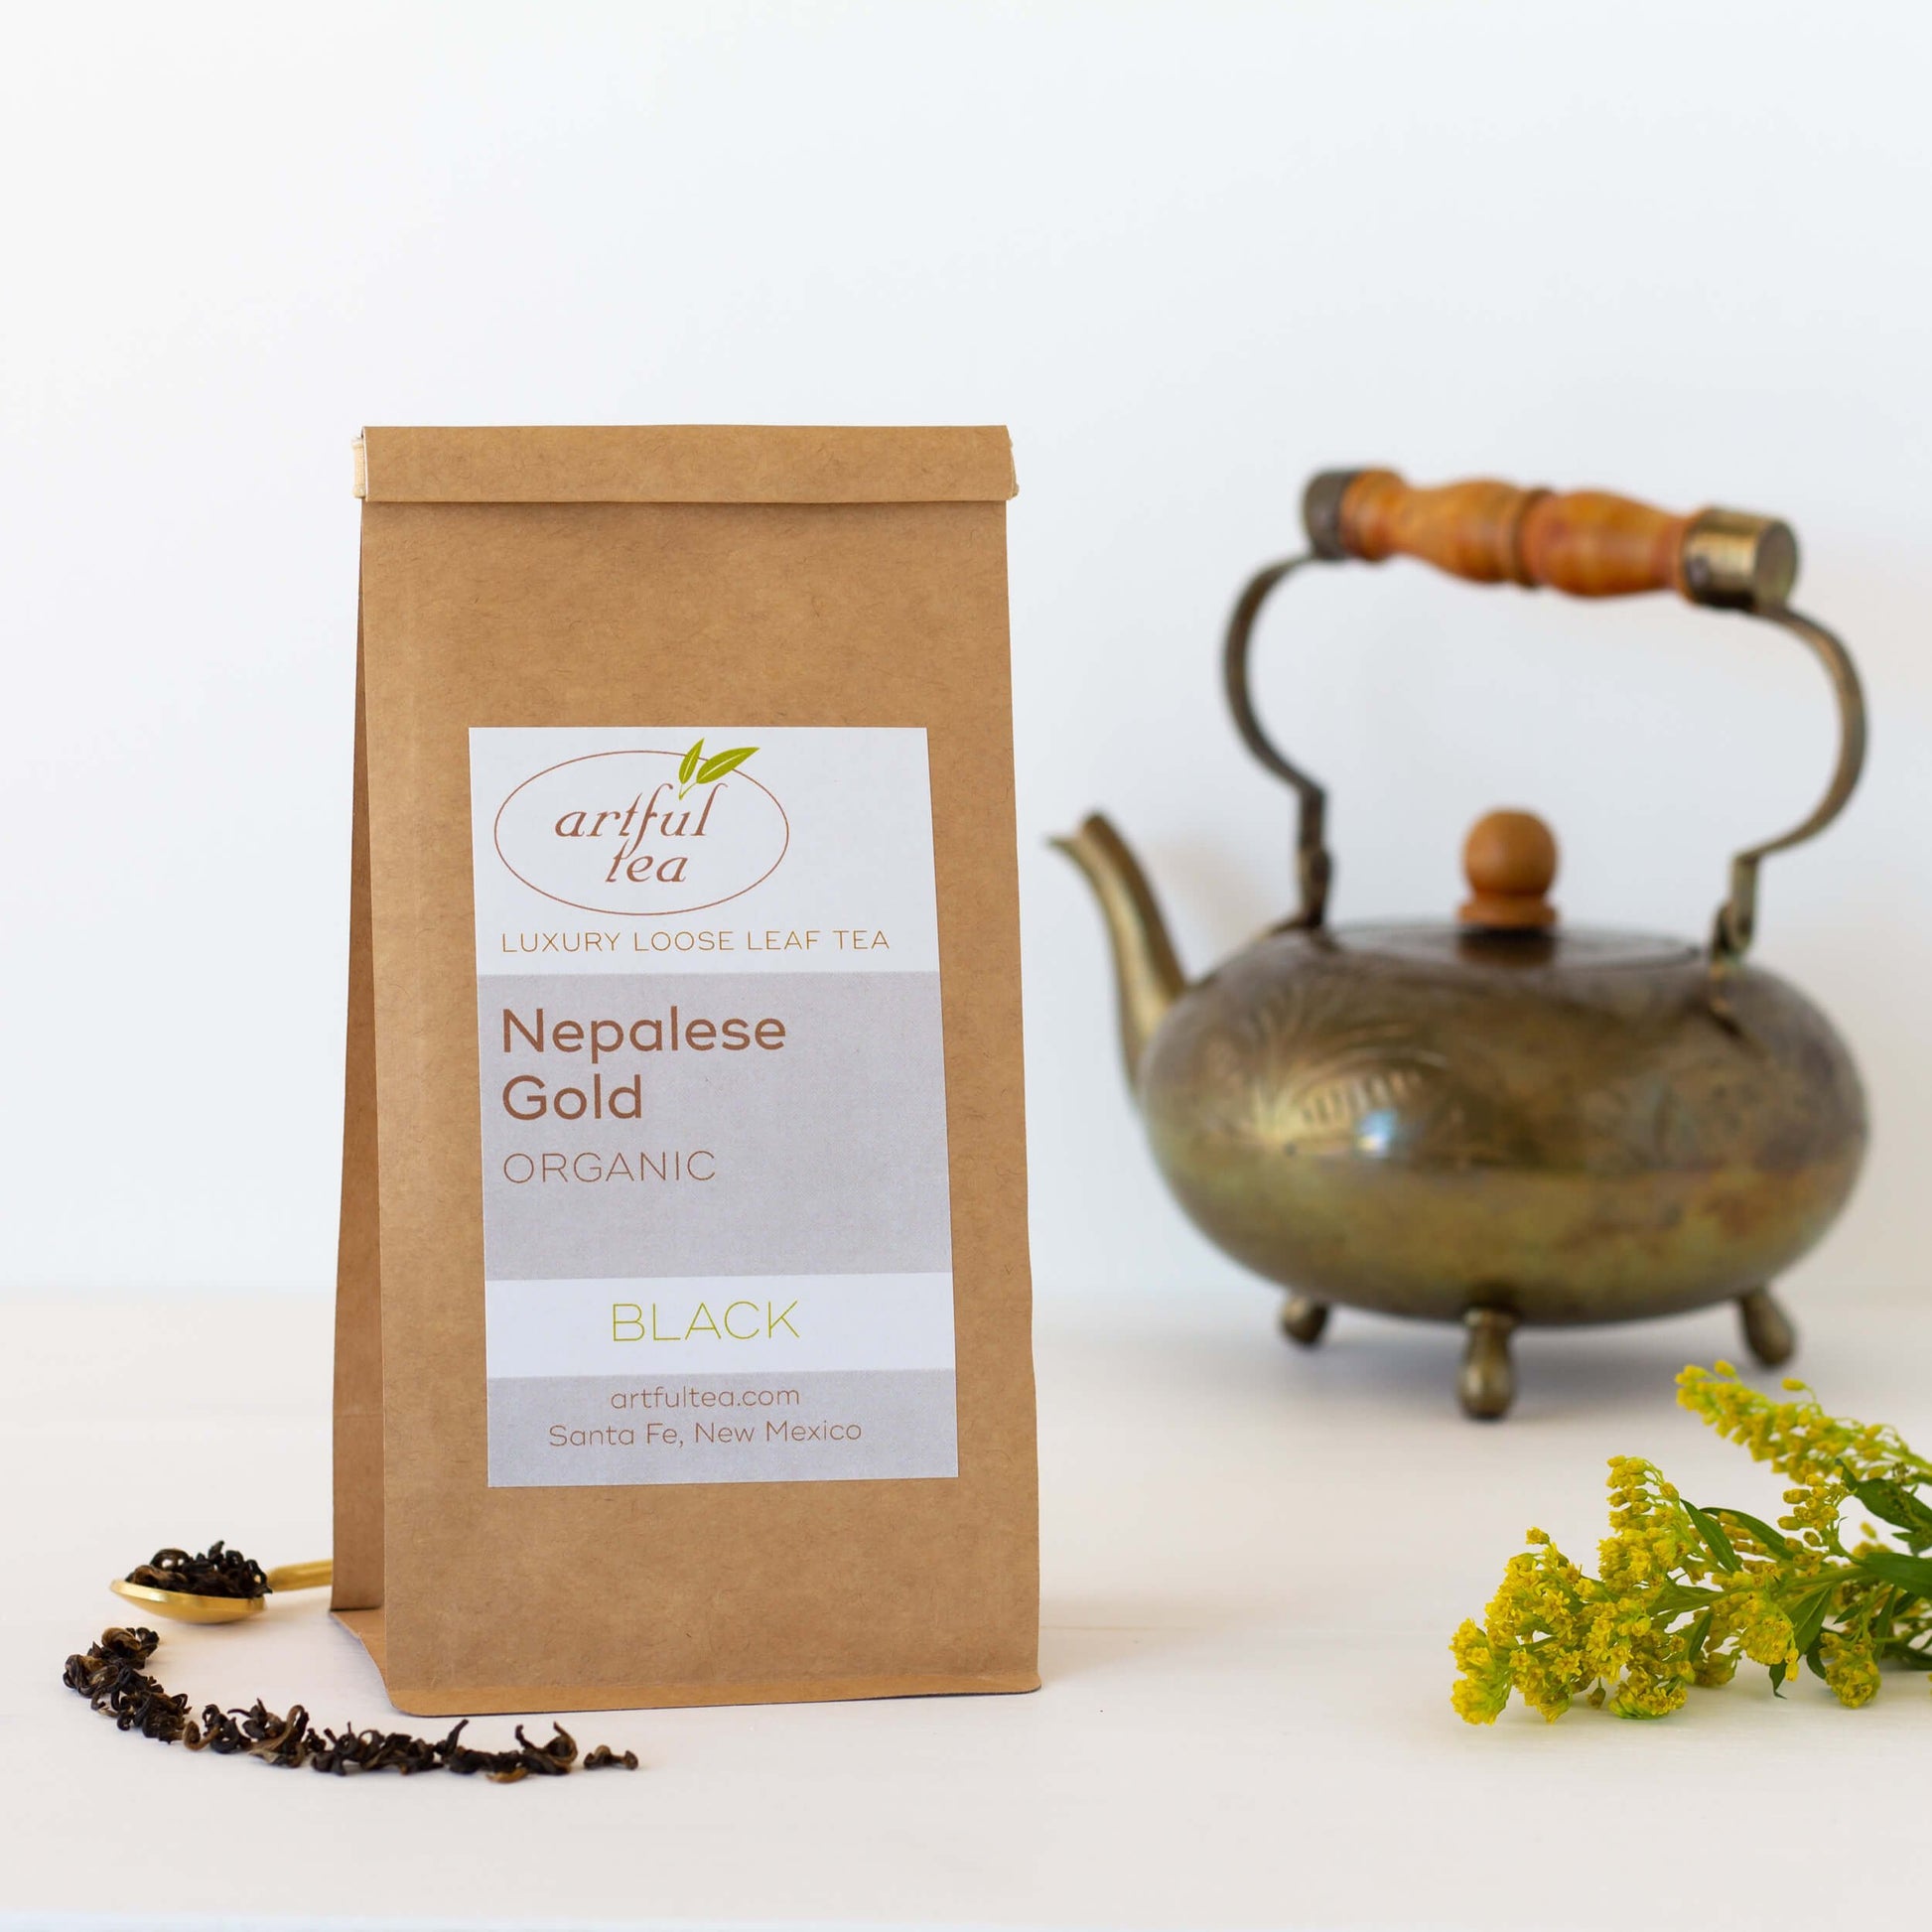 Nepalese Gold Black Tea shown packaged in a kraft bag with a brass teapot in the background and loose tea leaves to the side